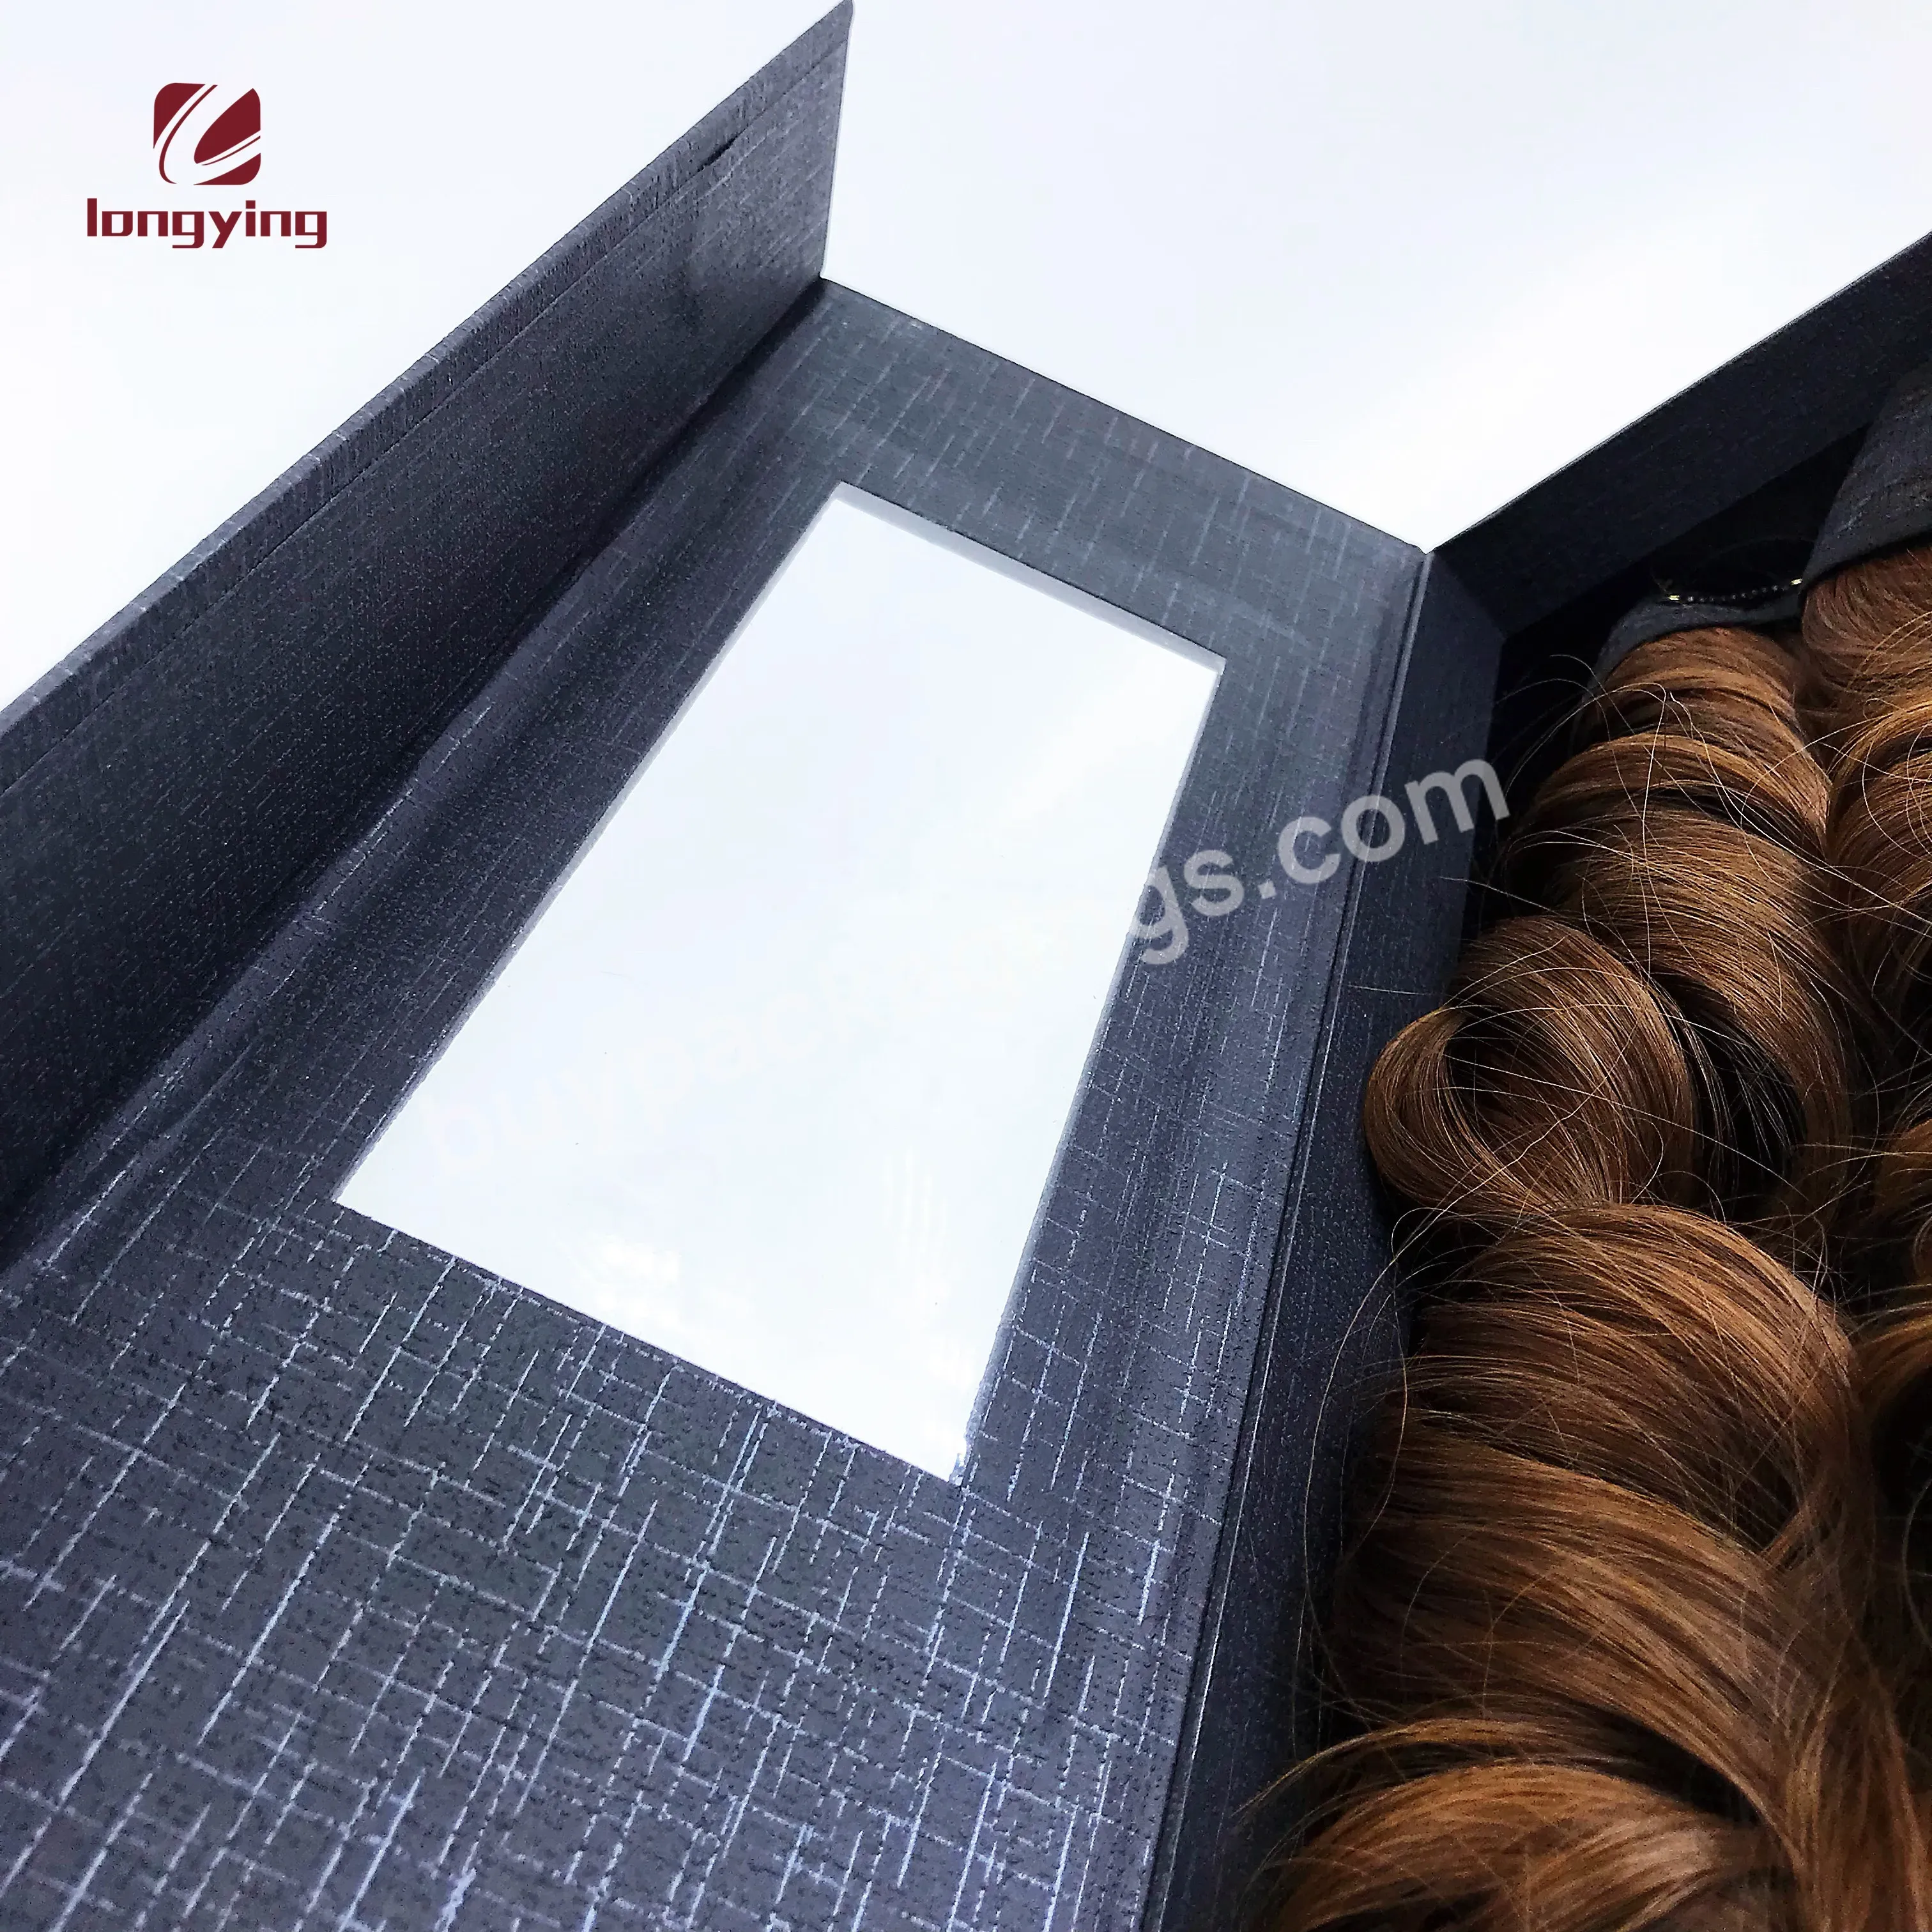 Custom China Luxury Matte Black Cardboard Boxes With Pvc Windows Magnet Box For Human Hair Wig Or Hair Extension Packaging - Buy China Luxury Matte Black Cardboard Boxes,Pvc Windows Magnet Box,Human Hair Wig Or Hair Extension Packaging.